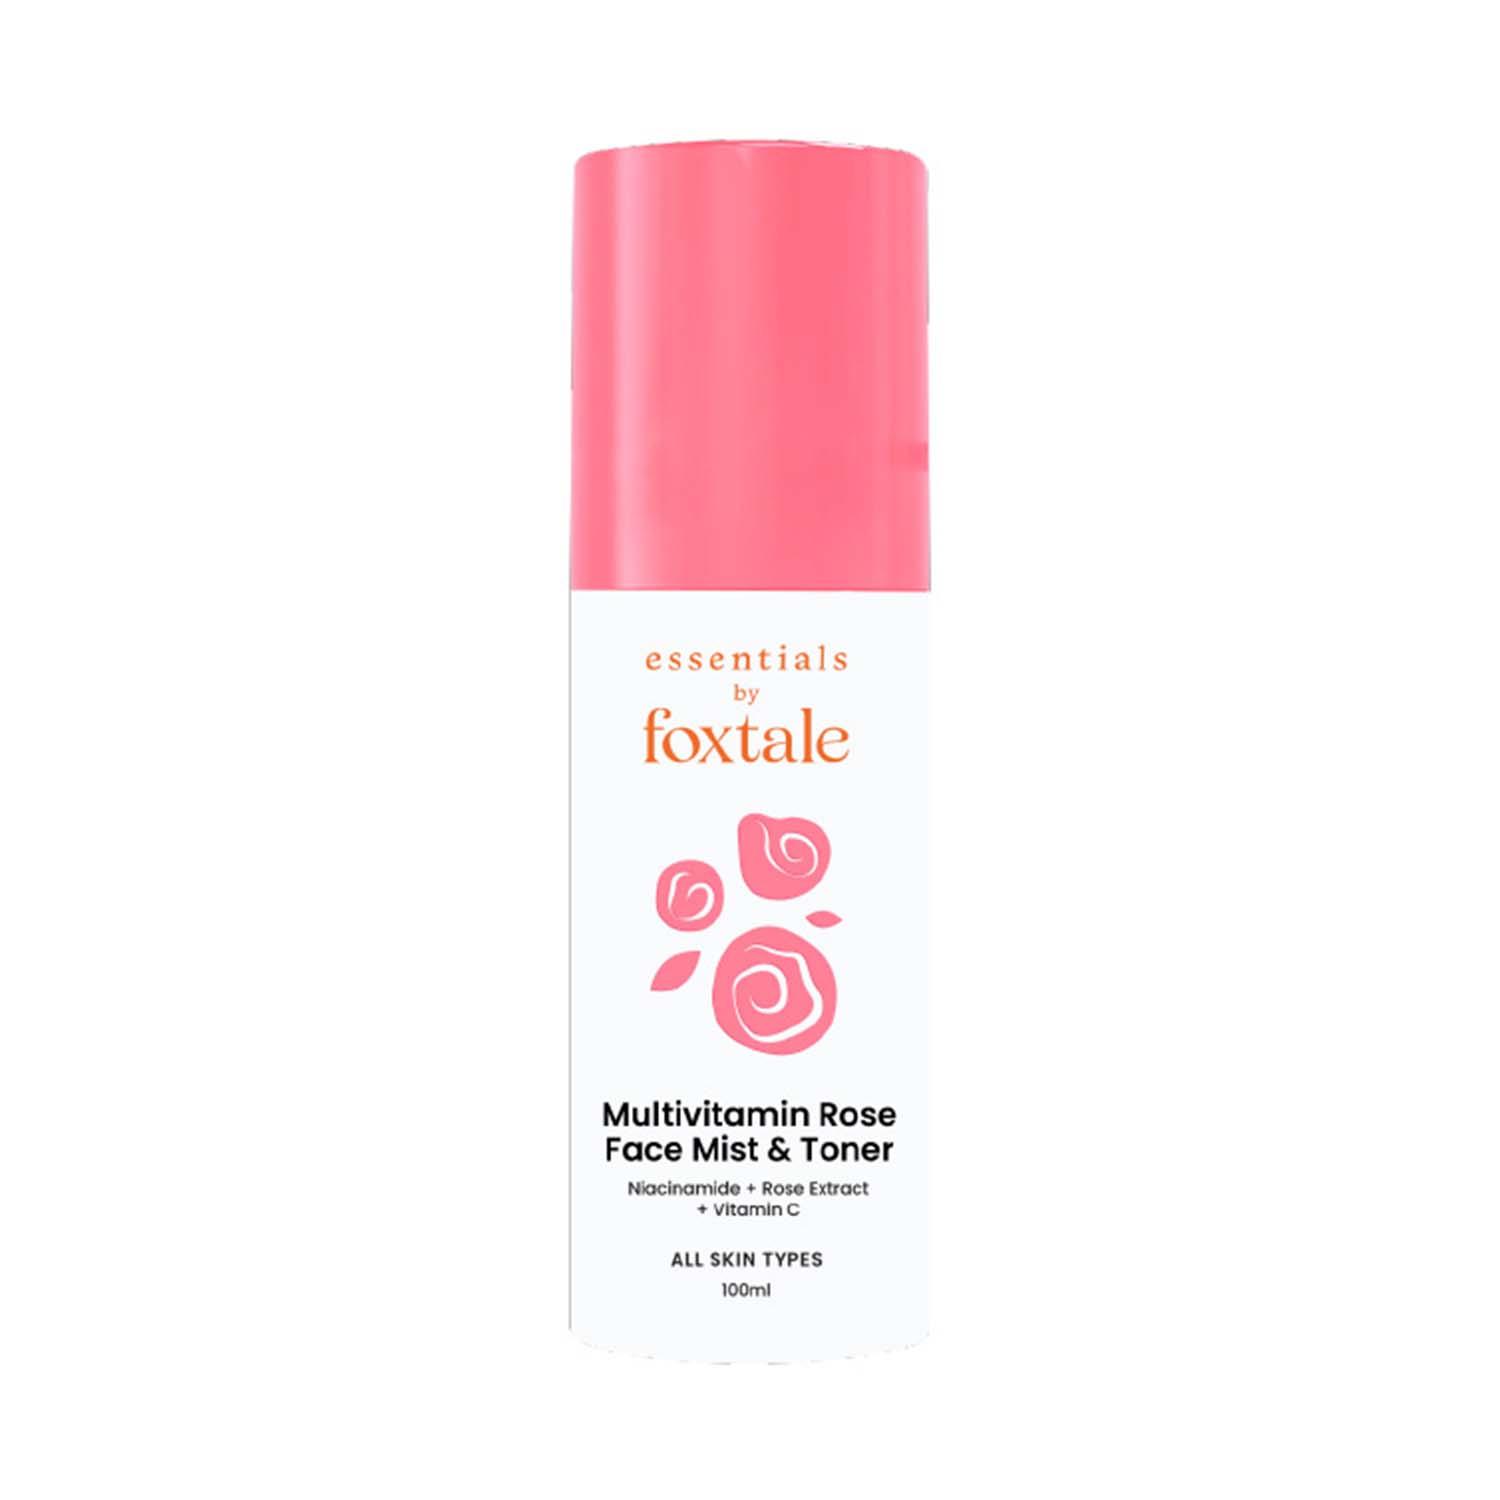 Foxtale Essentials Multivitamin Rose Mist & Toner With Niacinamide, Rose Extract (100ml)